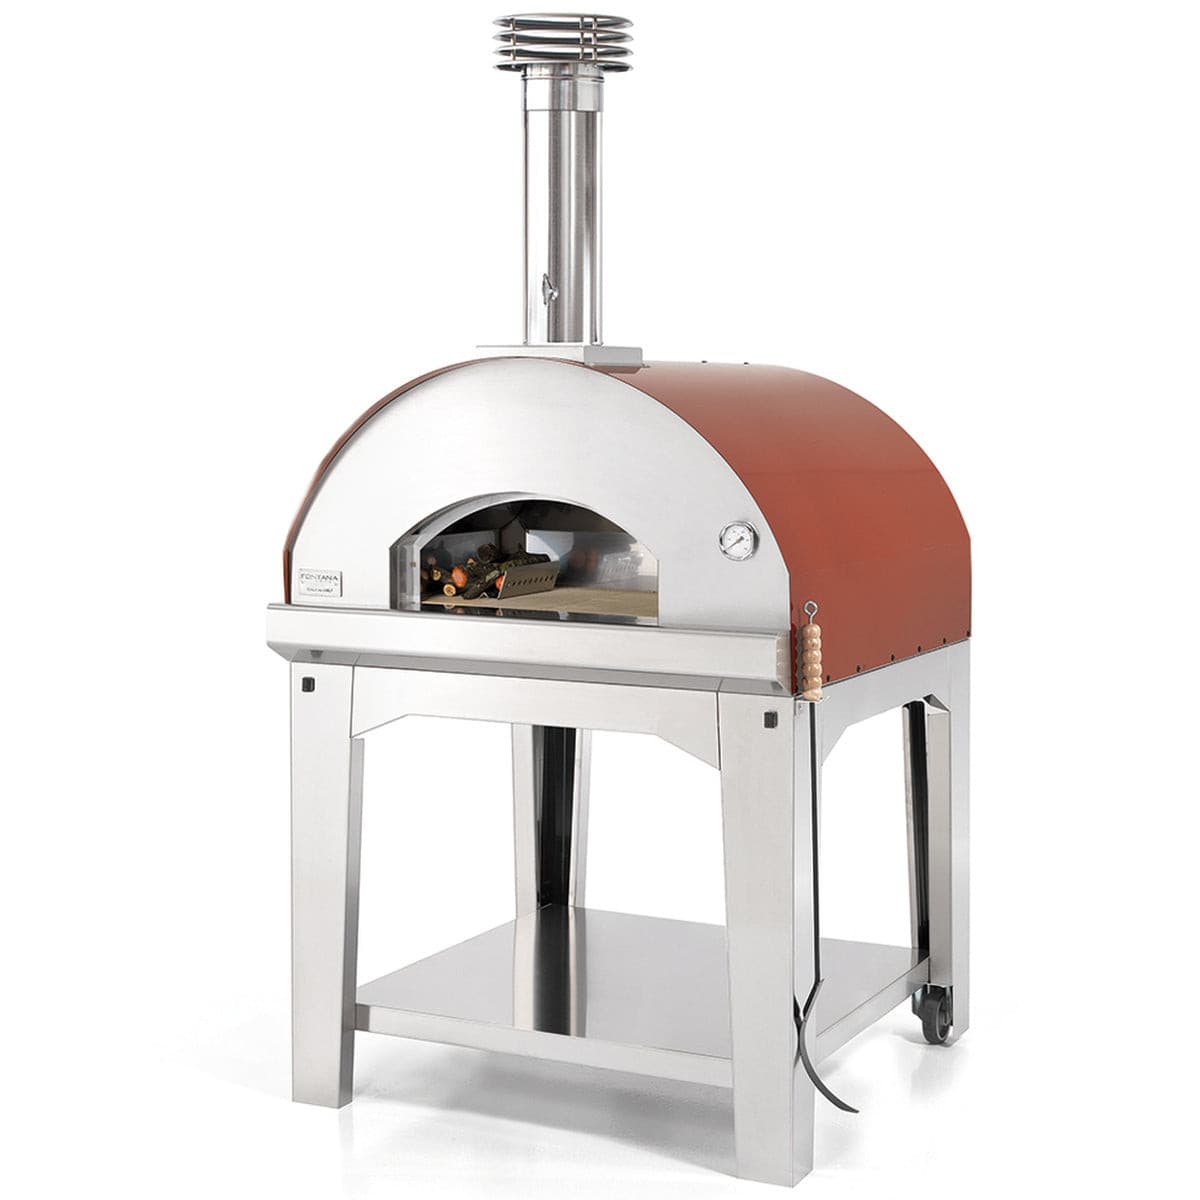 Fontana Marinara Wood Pizza Oven with Trolley - Vookoo Lifestyle